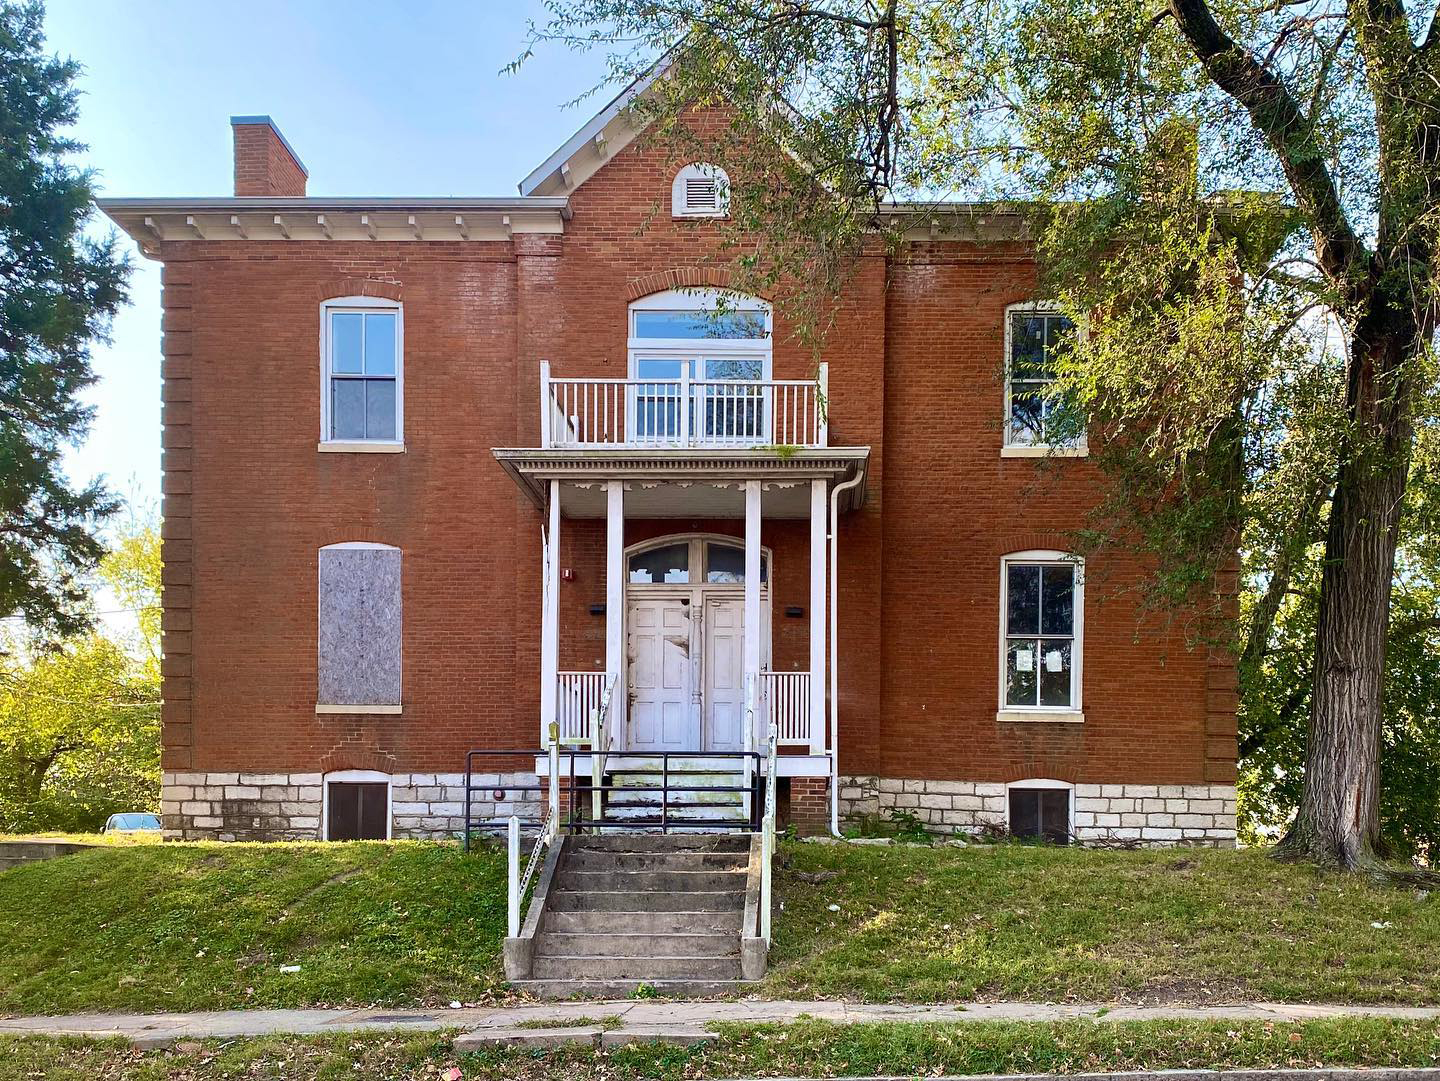 The birth home of Heidi Lange at 2722 Meramec Street in St. Louis, Dutchtown neighborhood. The Italinate mansion is brick, two stories, and well-maintained although some paint is peeling and windows are boarded up.